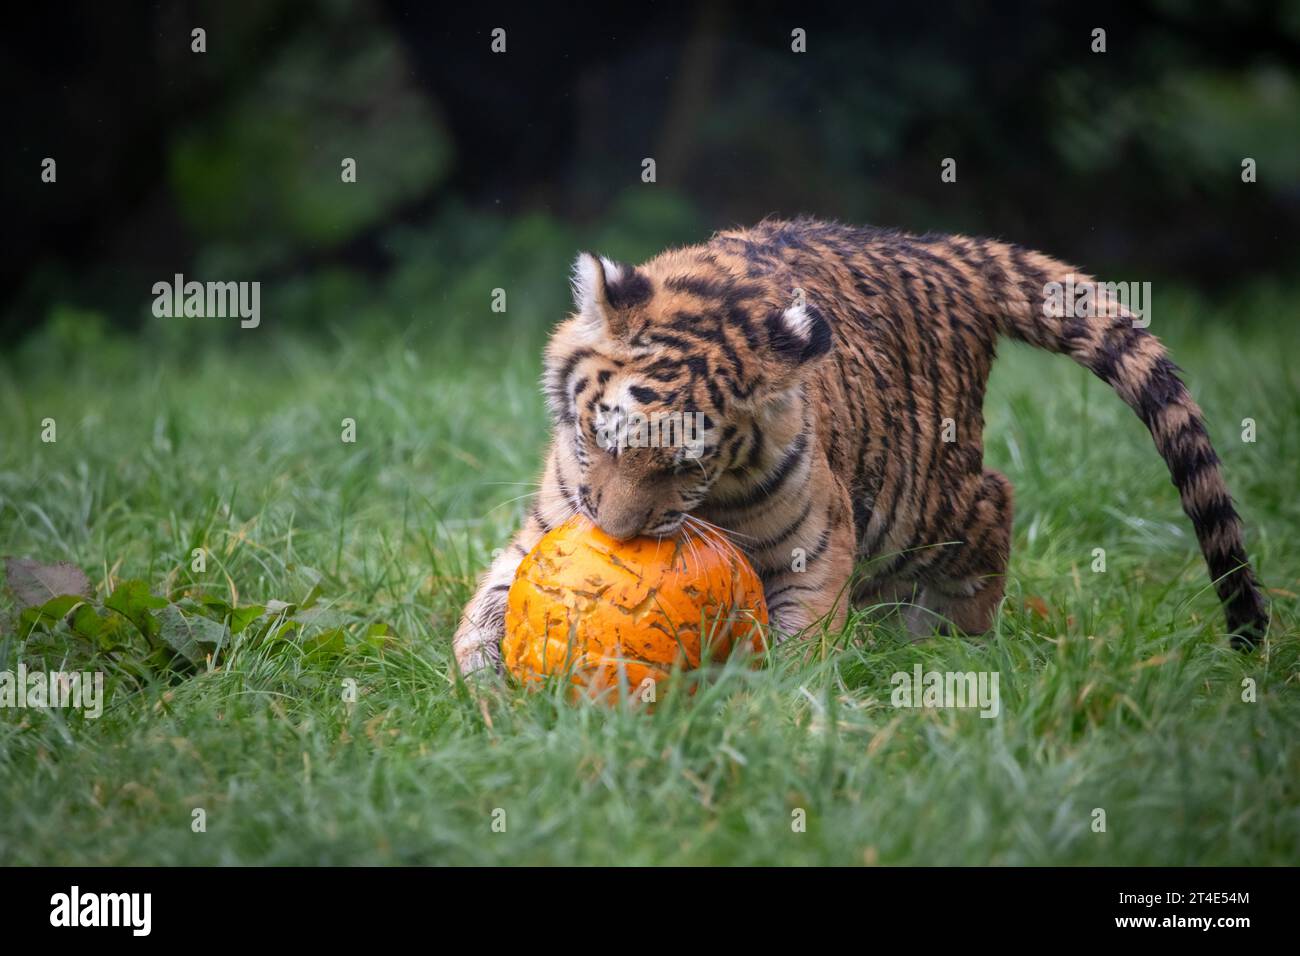 Kash tackles the giant toy BANHAM ZOO, NORFOLK, ENGLAND ADORABLE IMAGES of a five month old tiger cub playing with pumpkins have been captured on Octo Stock Photo